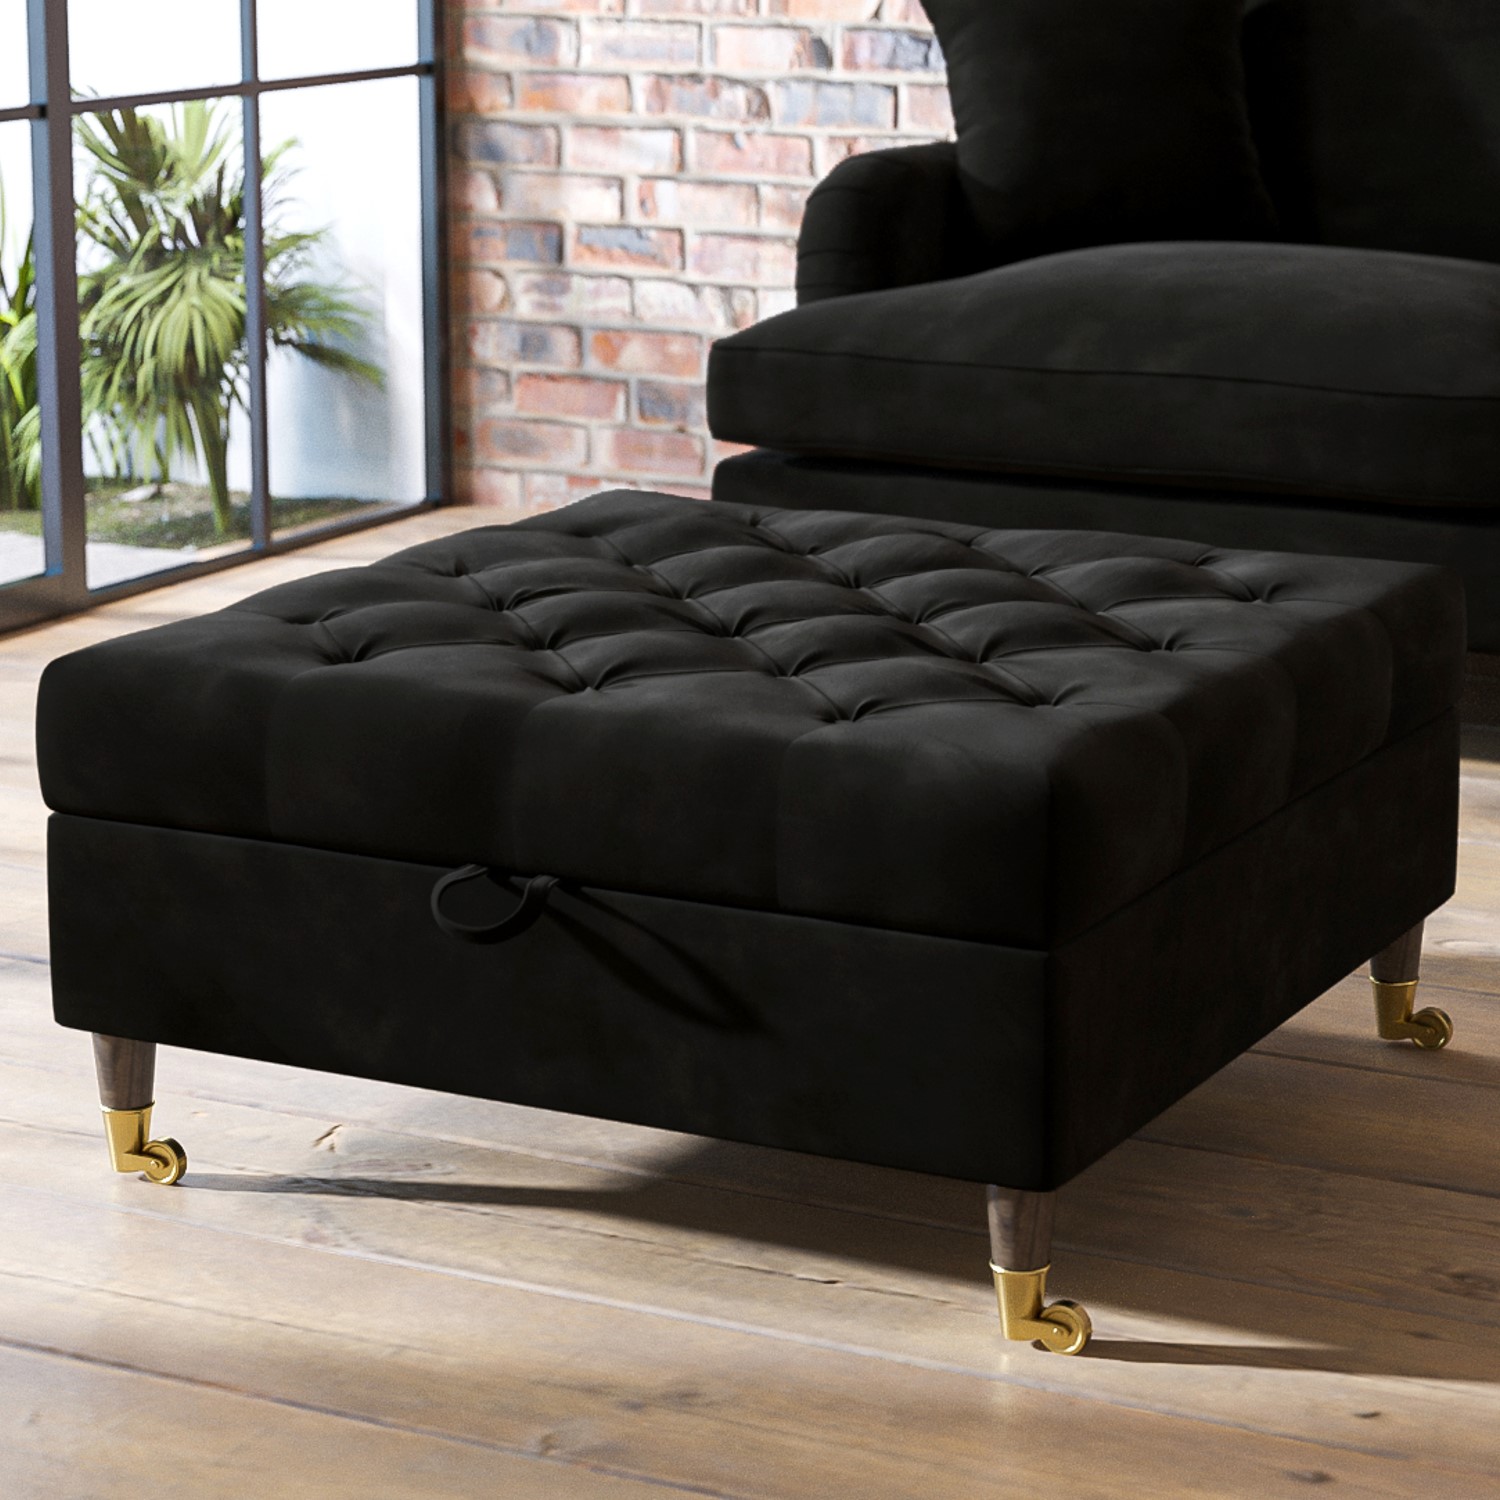 Photo of Large black velvet chesterfield footstool with storage - payton